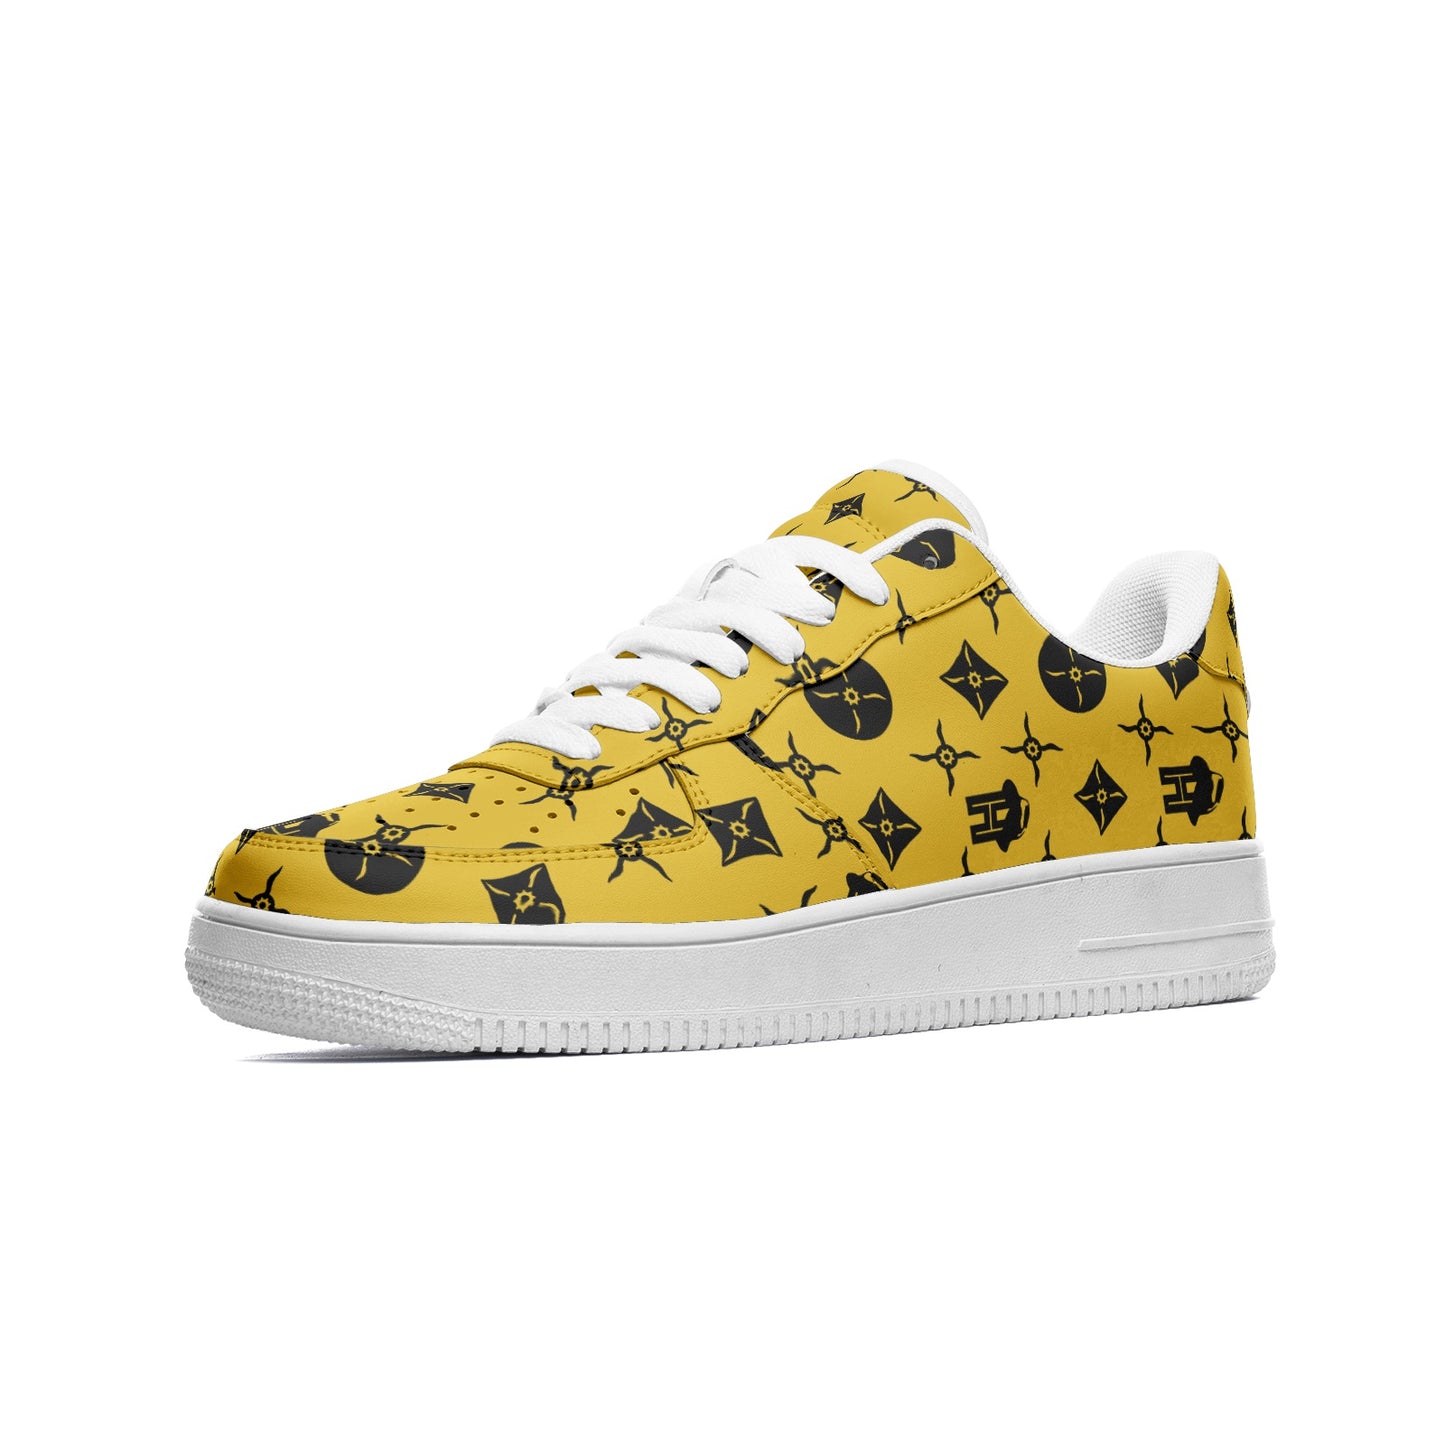 Black and Yellow Unisex Low Top Leather Sneakers - HipHatter